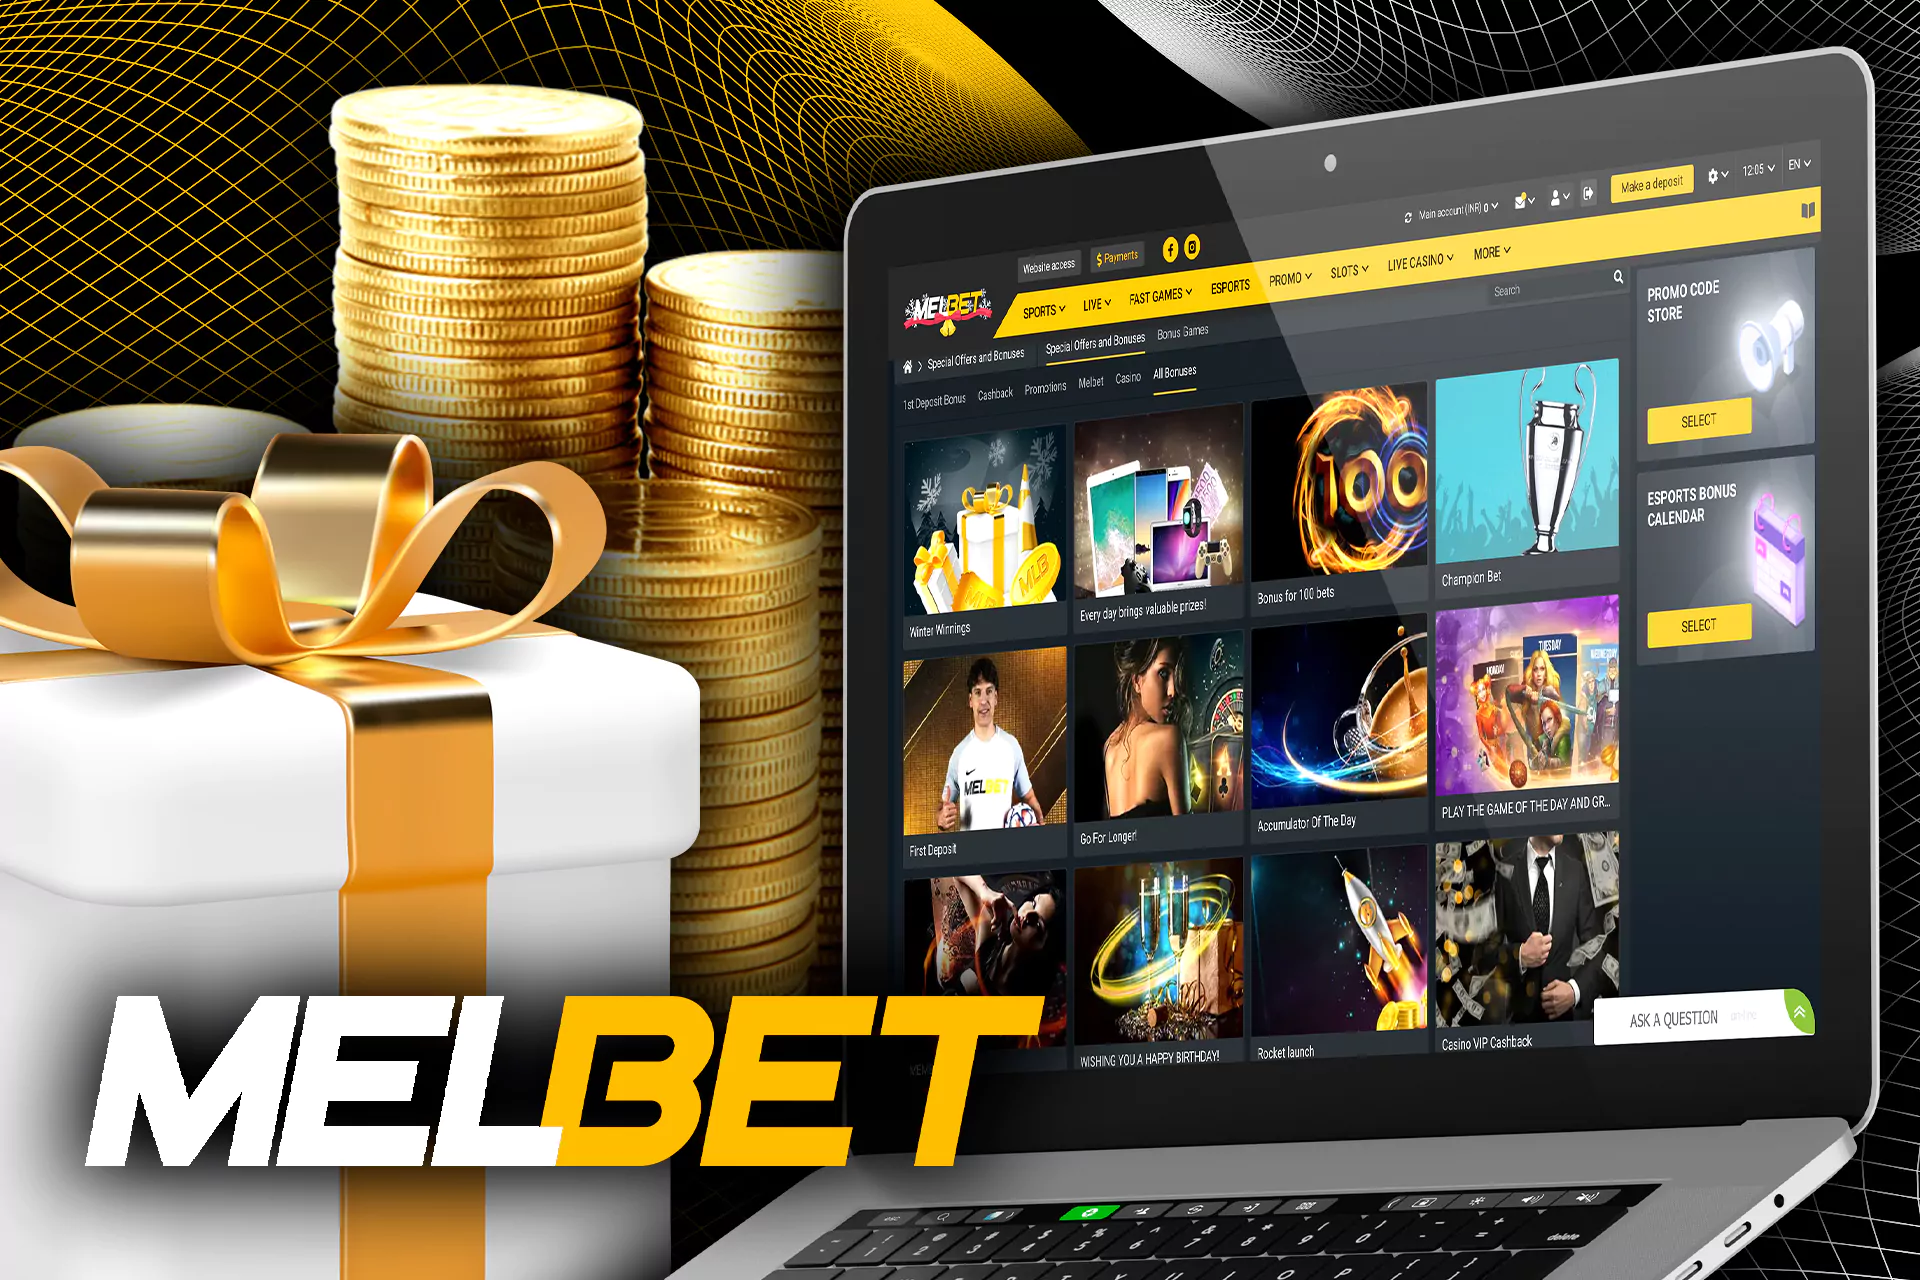 The Melbet loyalty program has been developed for regular bettors and casino players.